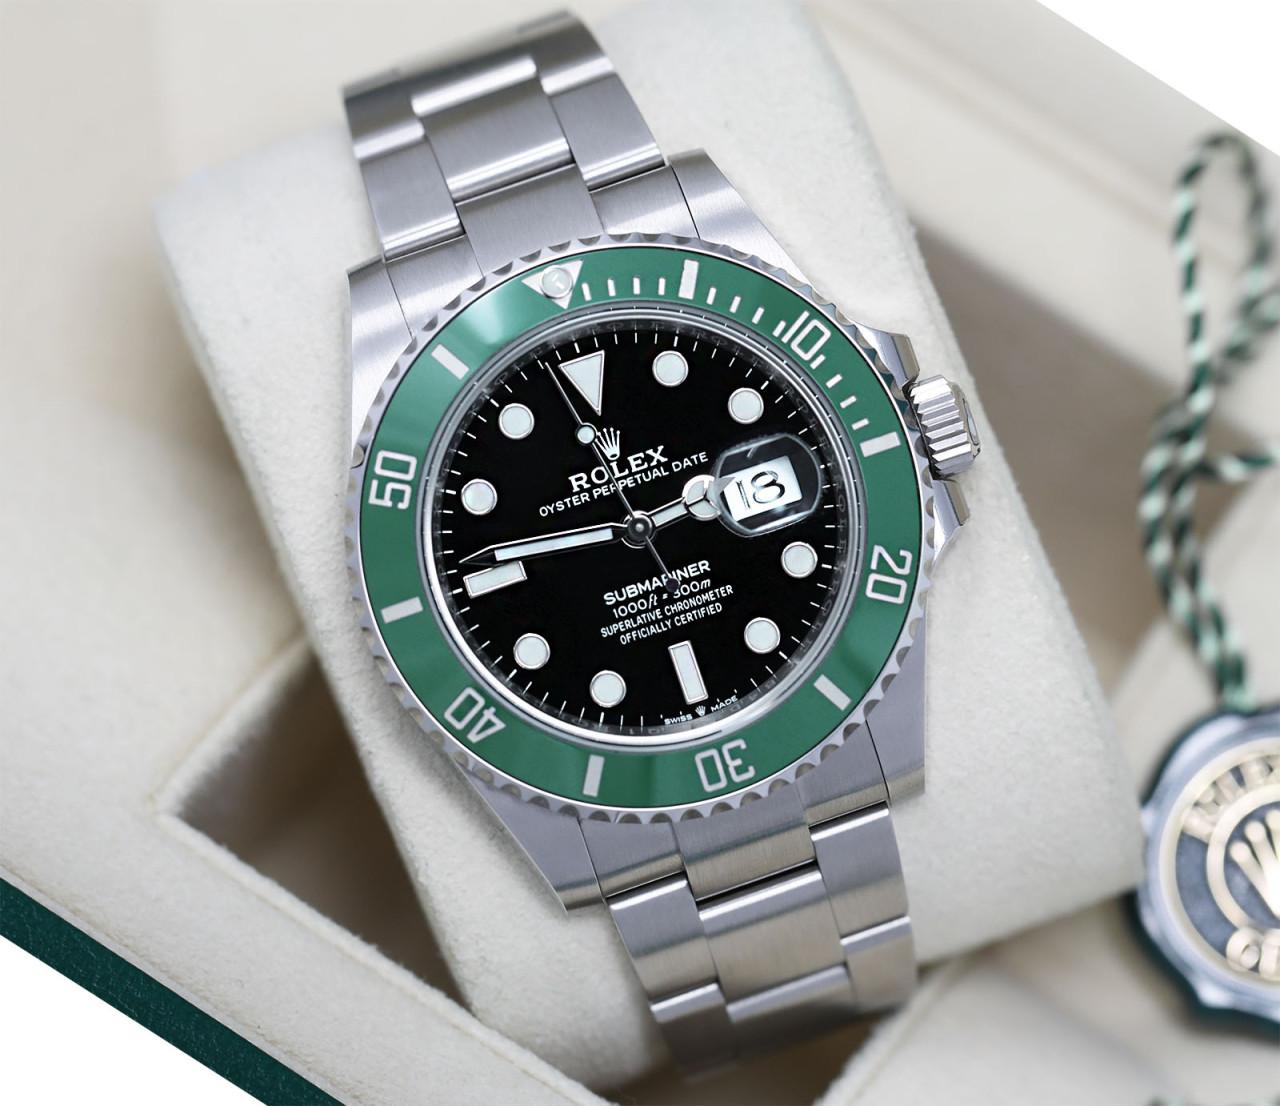 Rolex Submariner Date 126610LV Stainless Steel Watch Kermit Green Bezel 2022

We are a premiere distributor of pre-owned and new watches, where we guarantee complete authenticity and corresponding aesthetic to all of our timepieces. We guarantee the